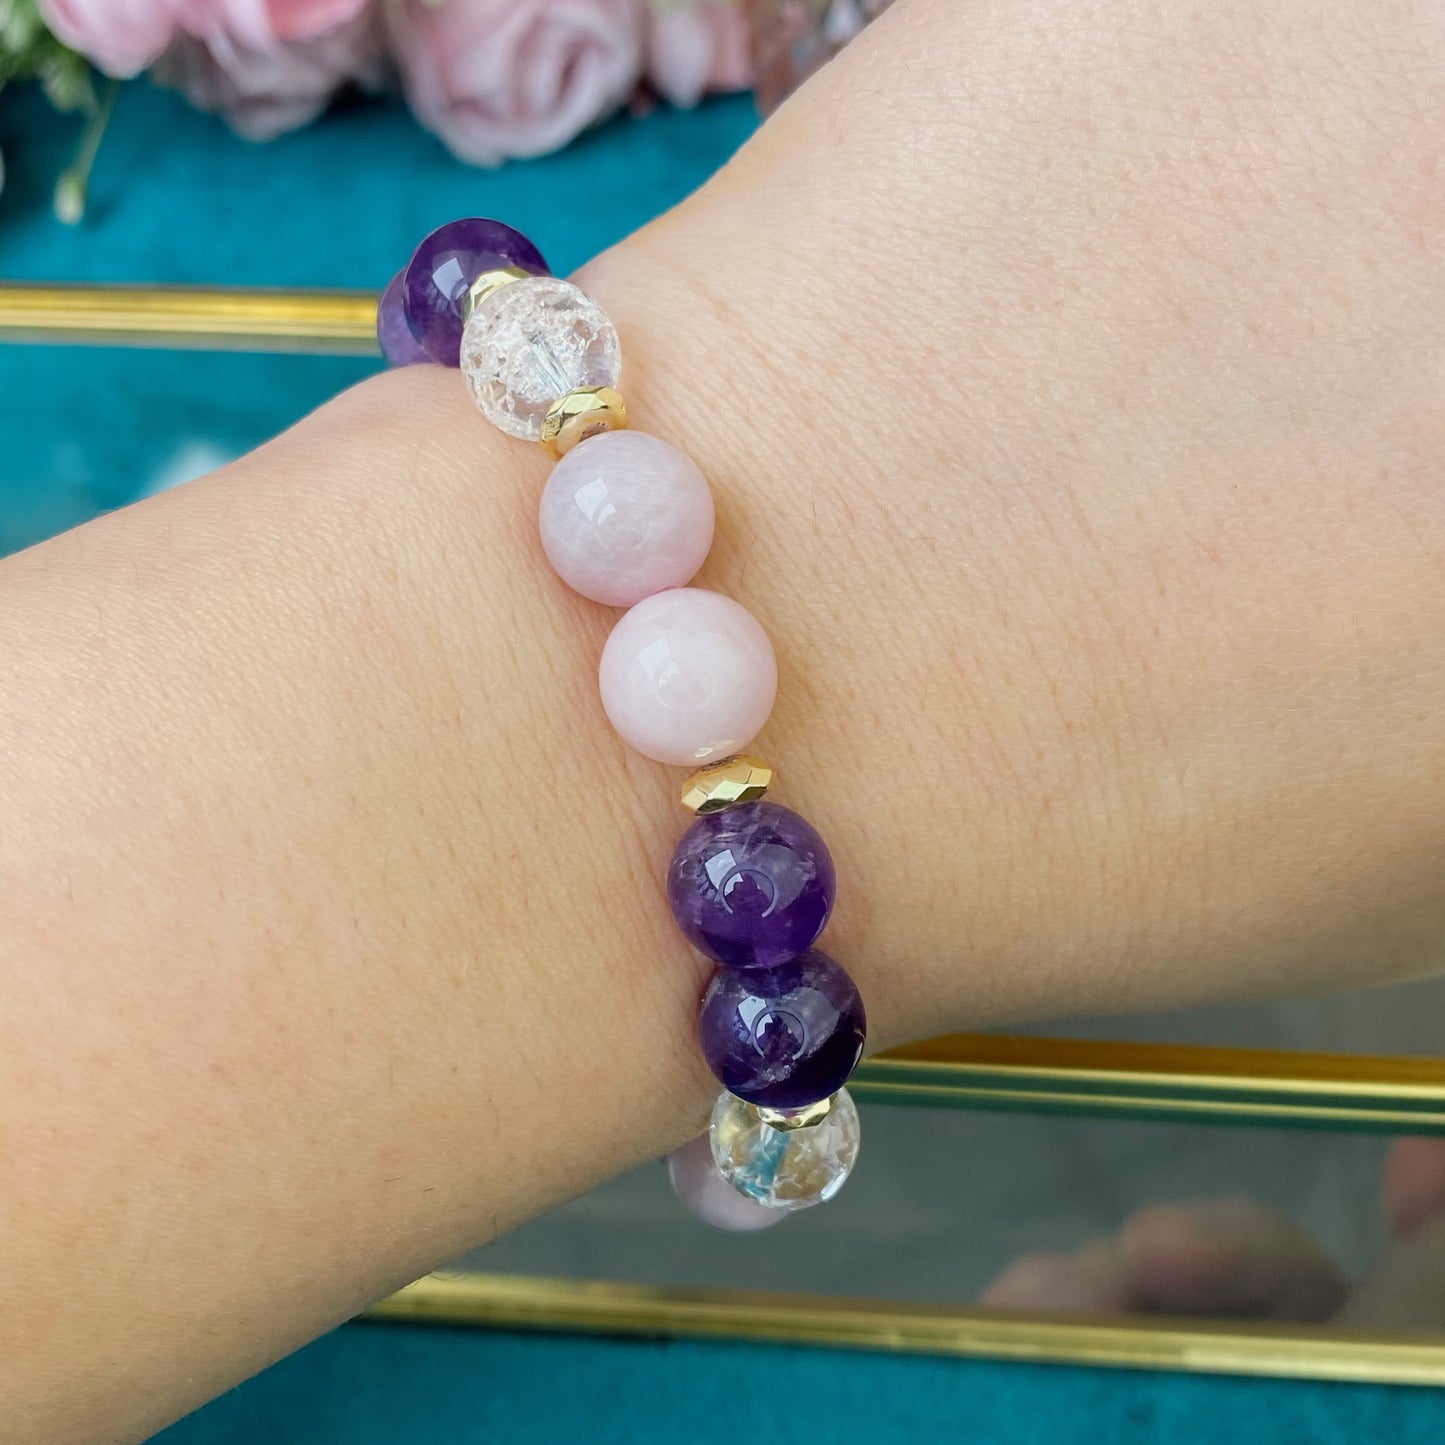 Madagascar Rose Quartz bracelet with Amethyst and Clear Quartz (Rose Quartz, Amethyst, Clear Quartz,10mm.For love, harmony and luck)